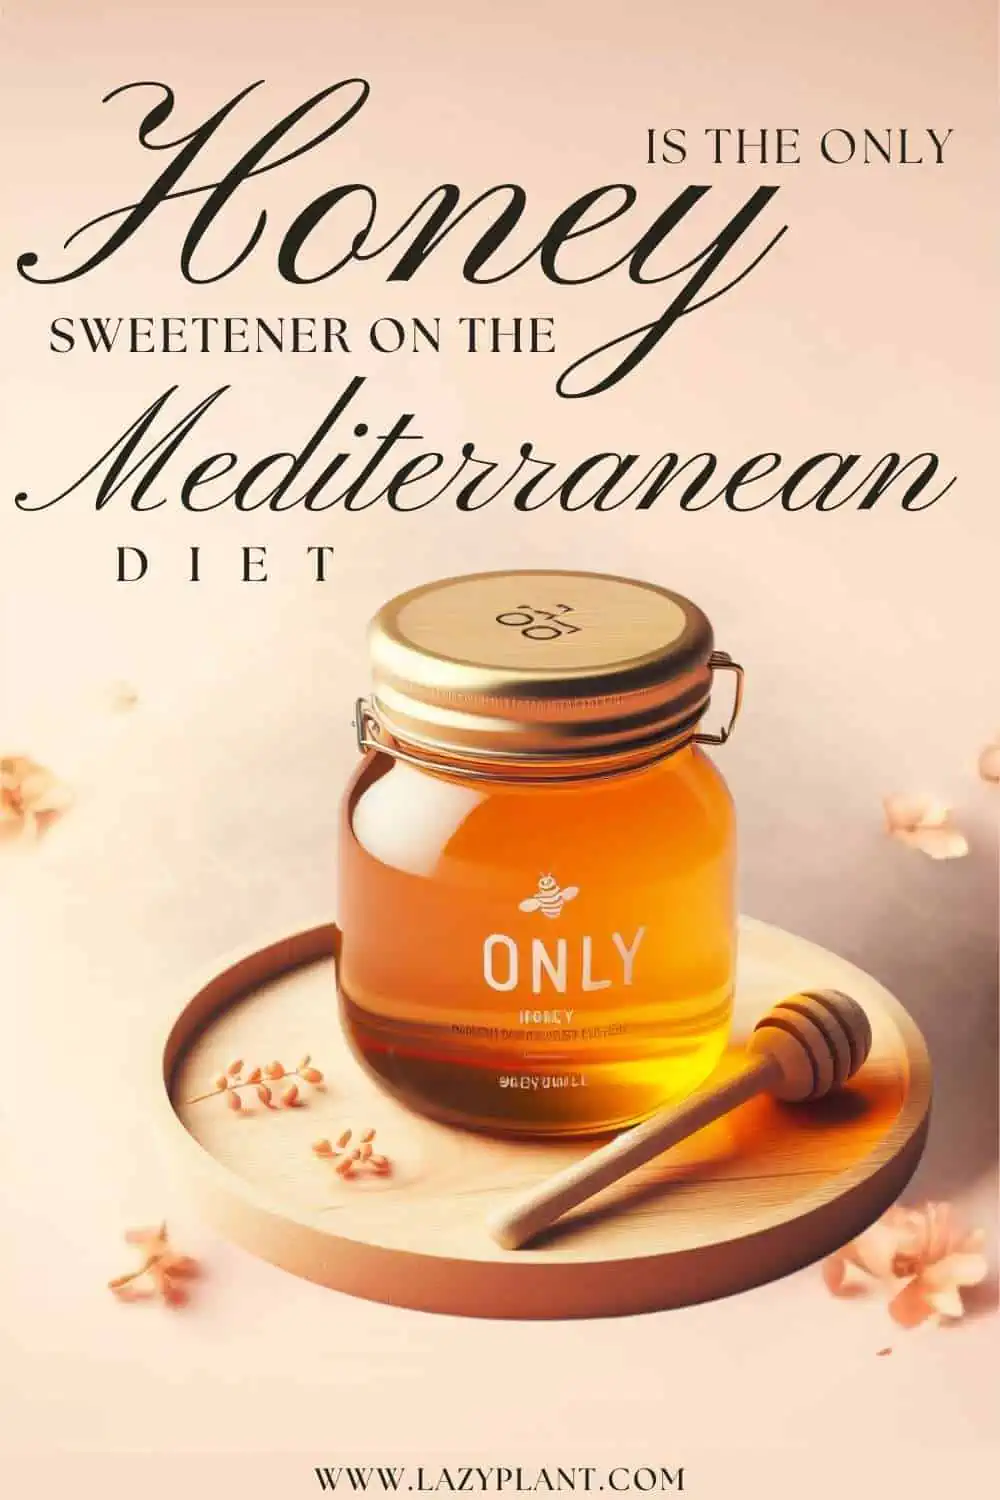 Honey is the only Sweetener on the Mediterranean Diet